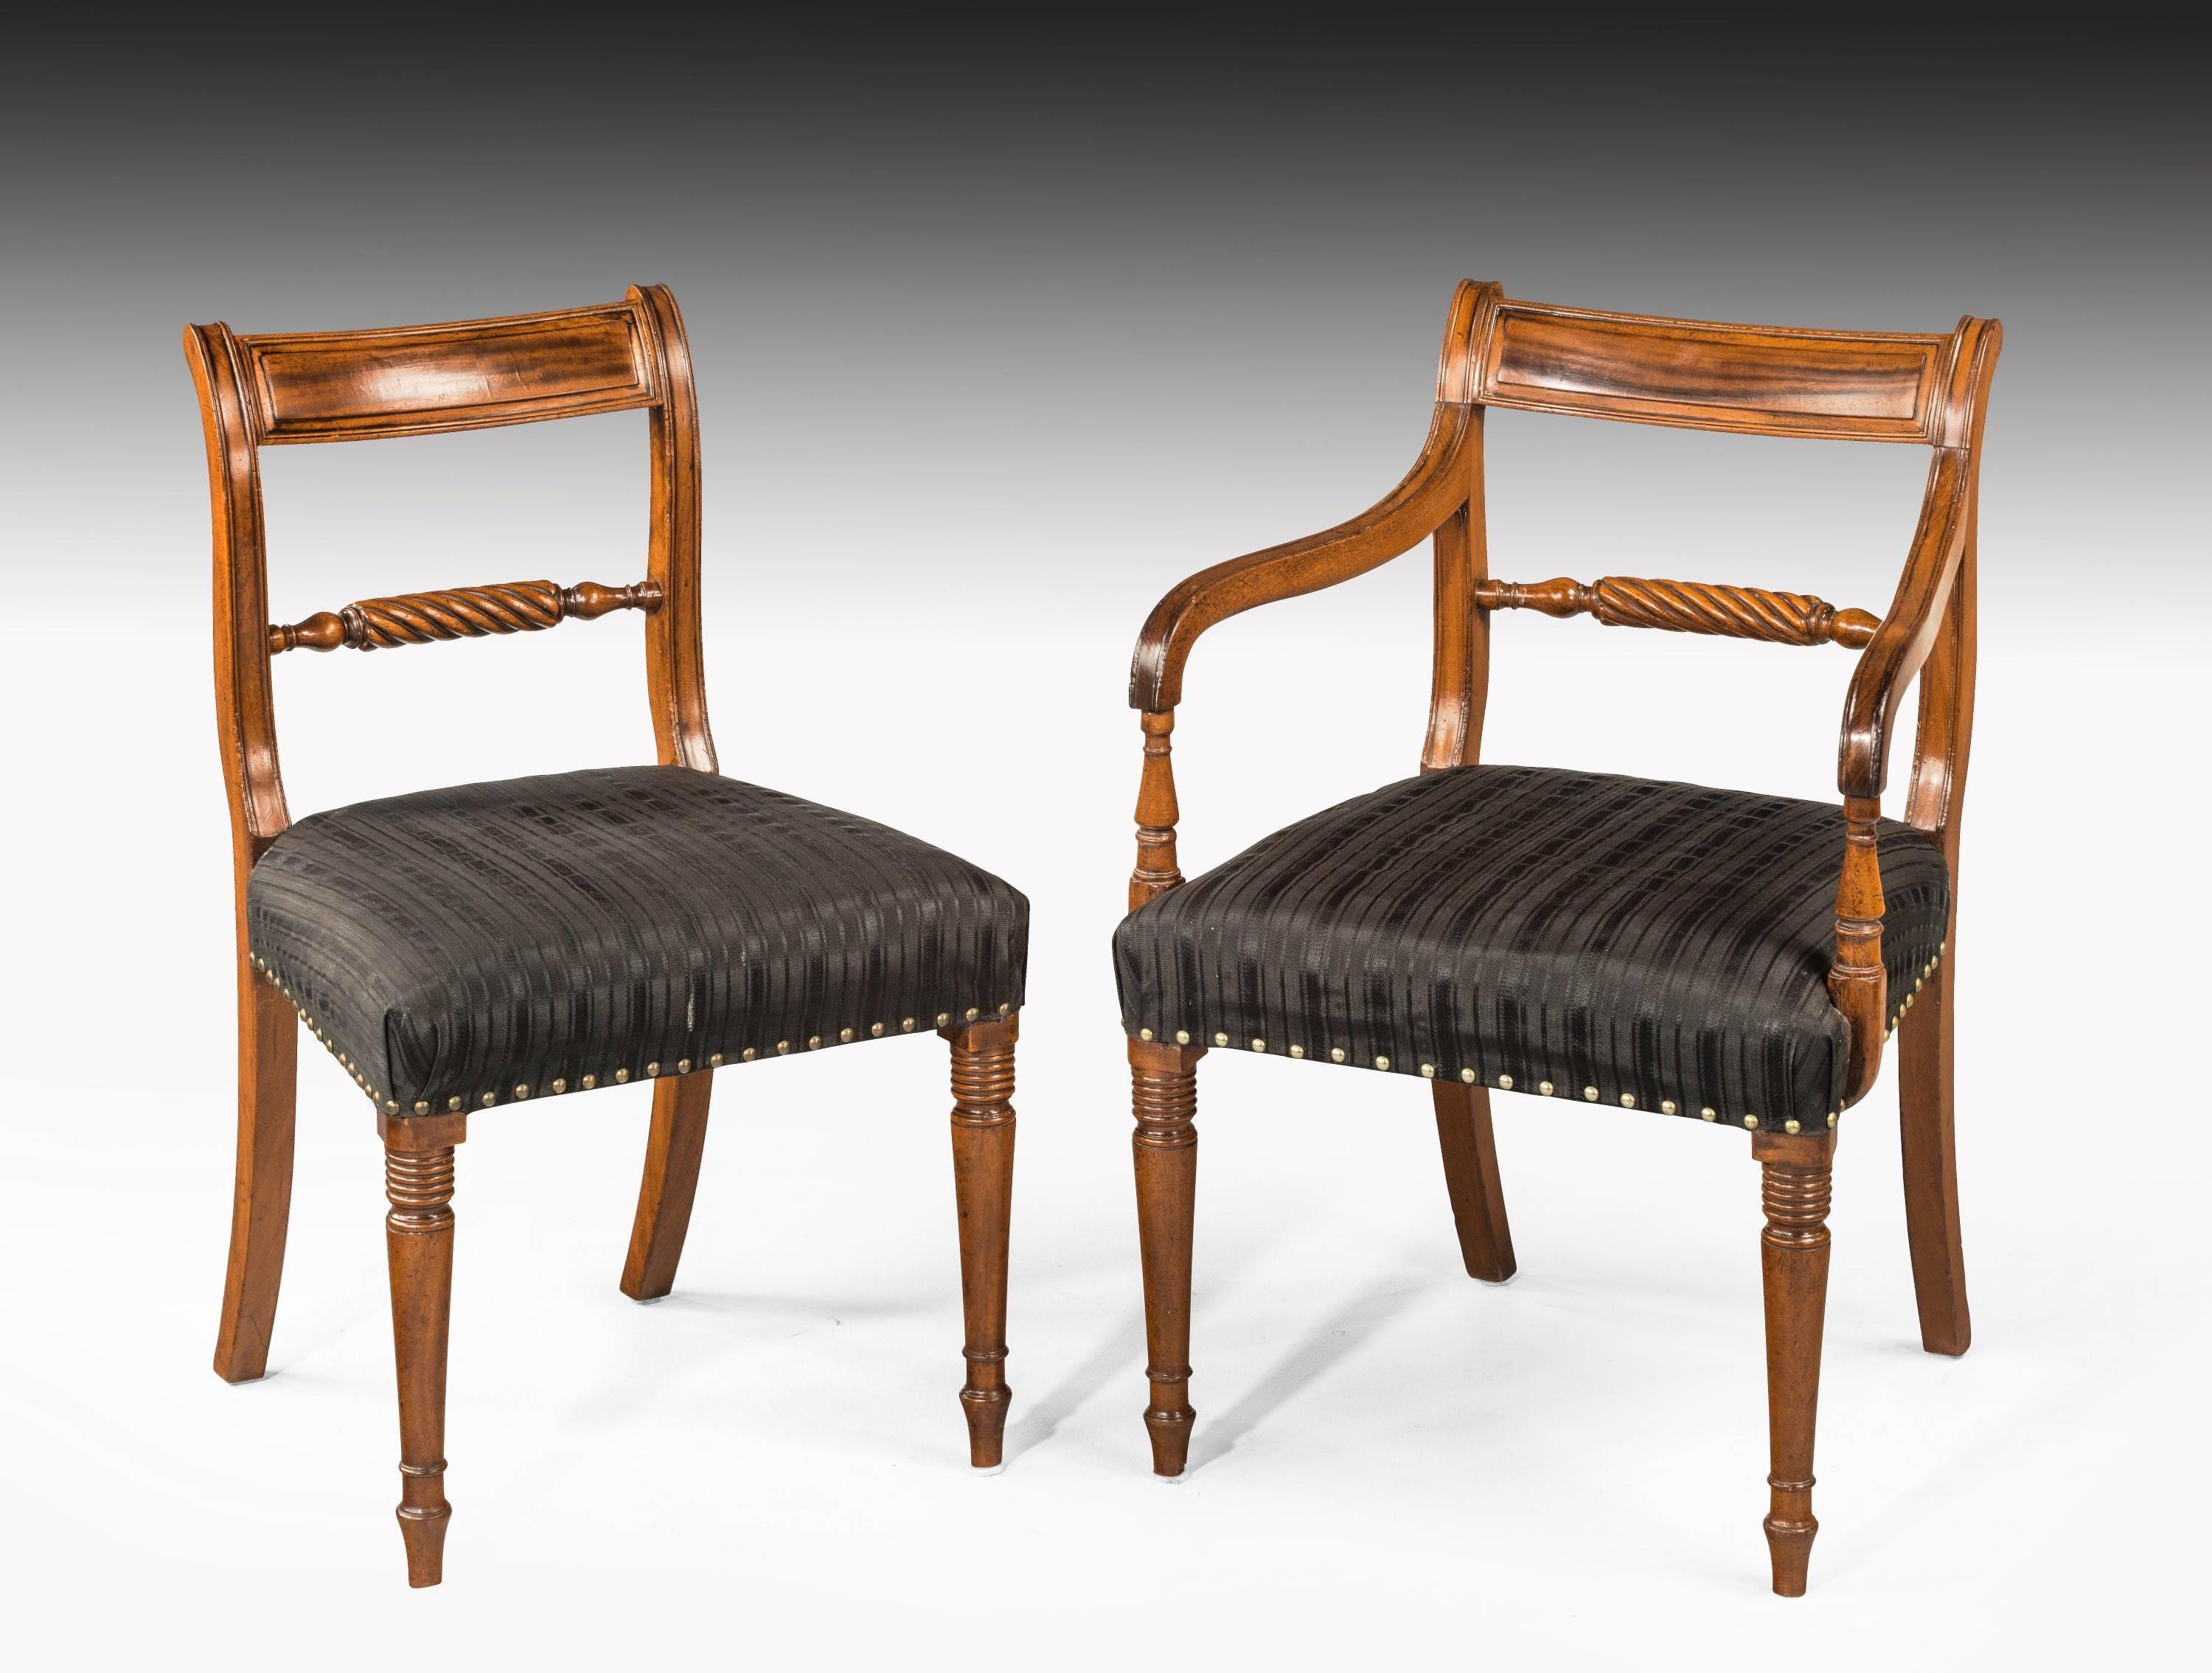 A quite exceptional set of 18 Regency period mahogany framed chairs. On tapering well turned supports. The back with Trafalgar rope twist centre splat. In quite extraordinary good original condition including all the surfaces and polish. 

Measure: